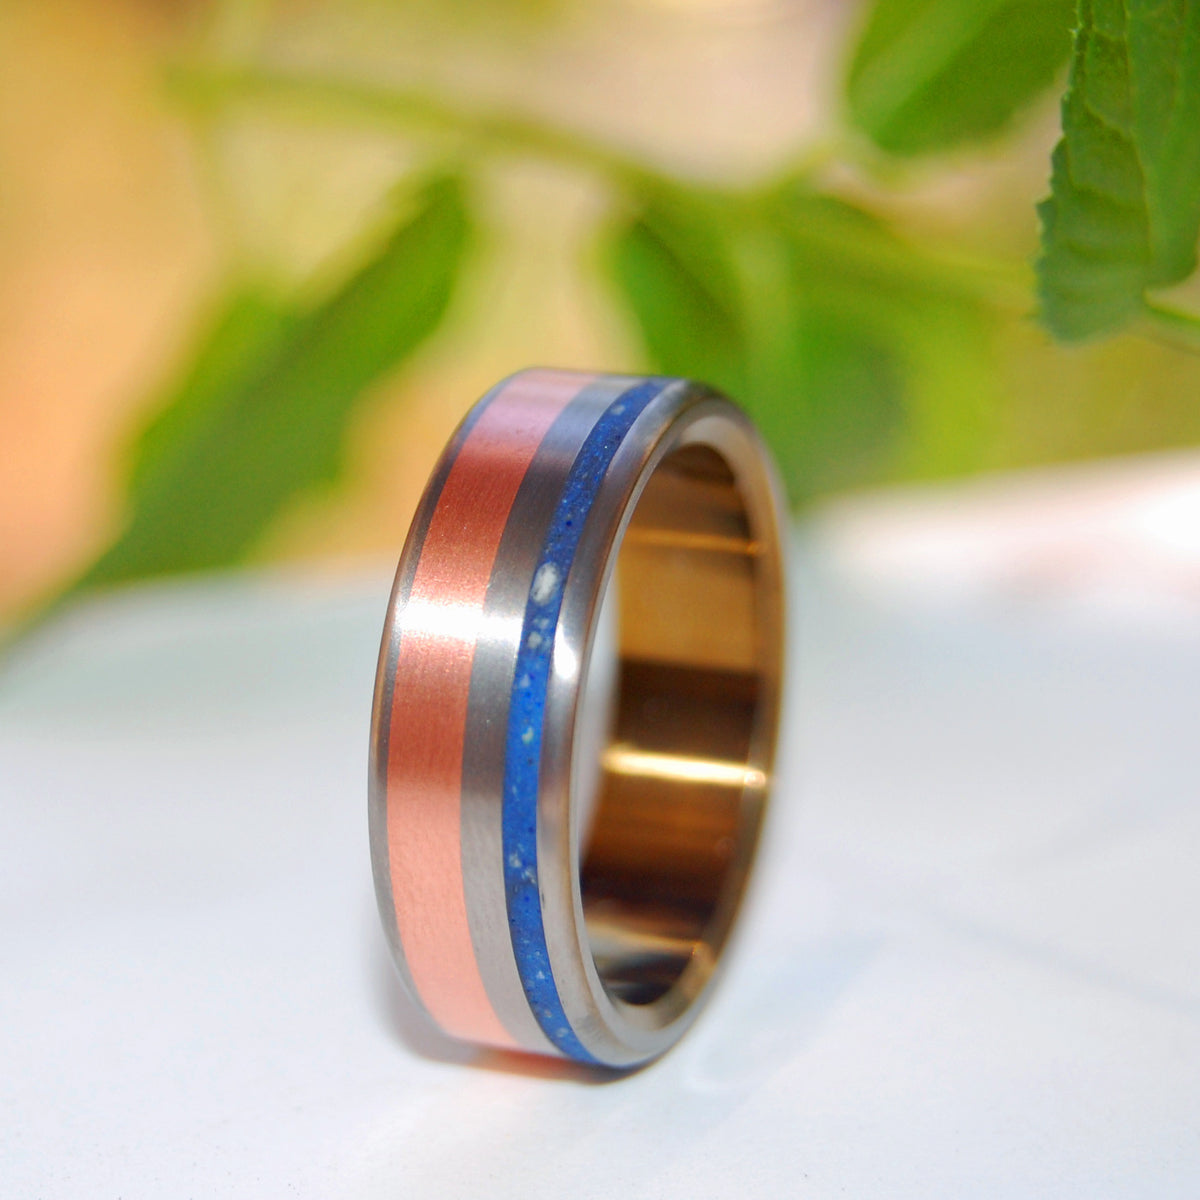 How We Love - Brushed Satin | Copper and Concrete Titanium Wedding Ring - Minter and Richter Designs